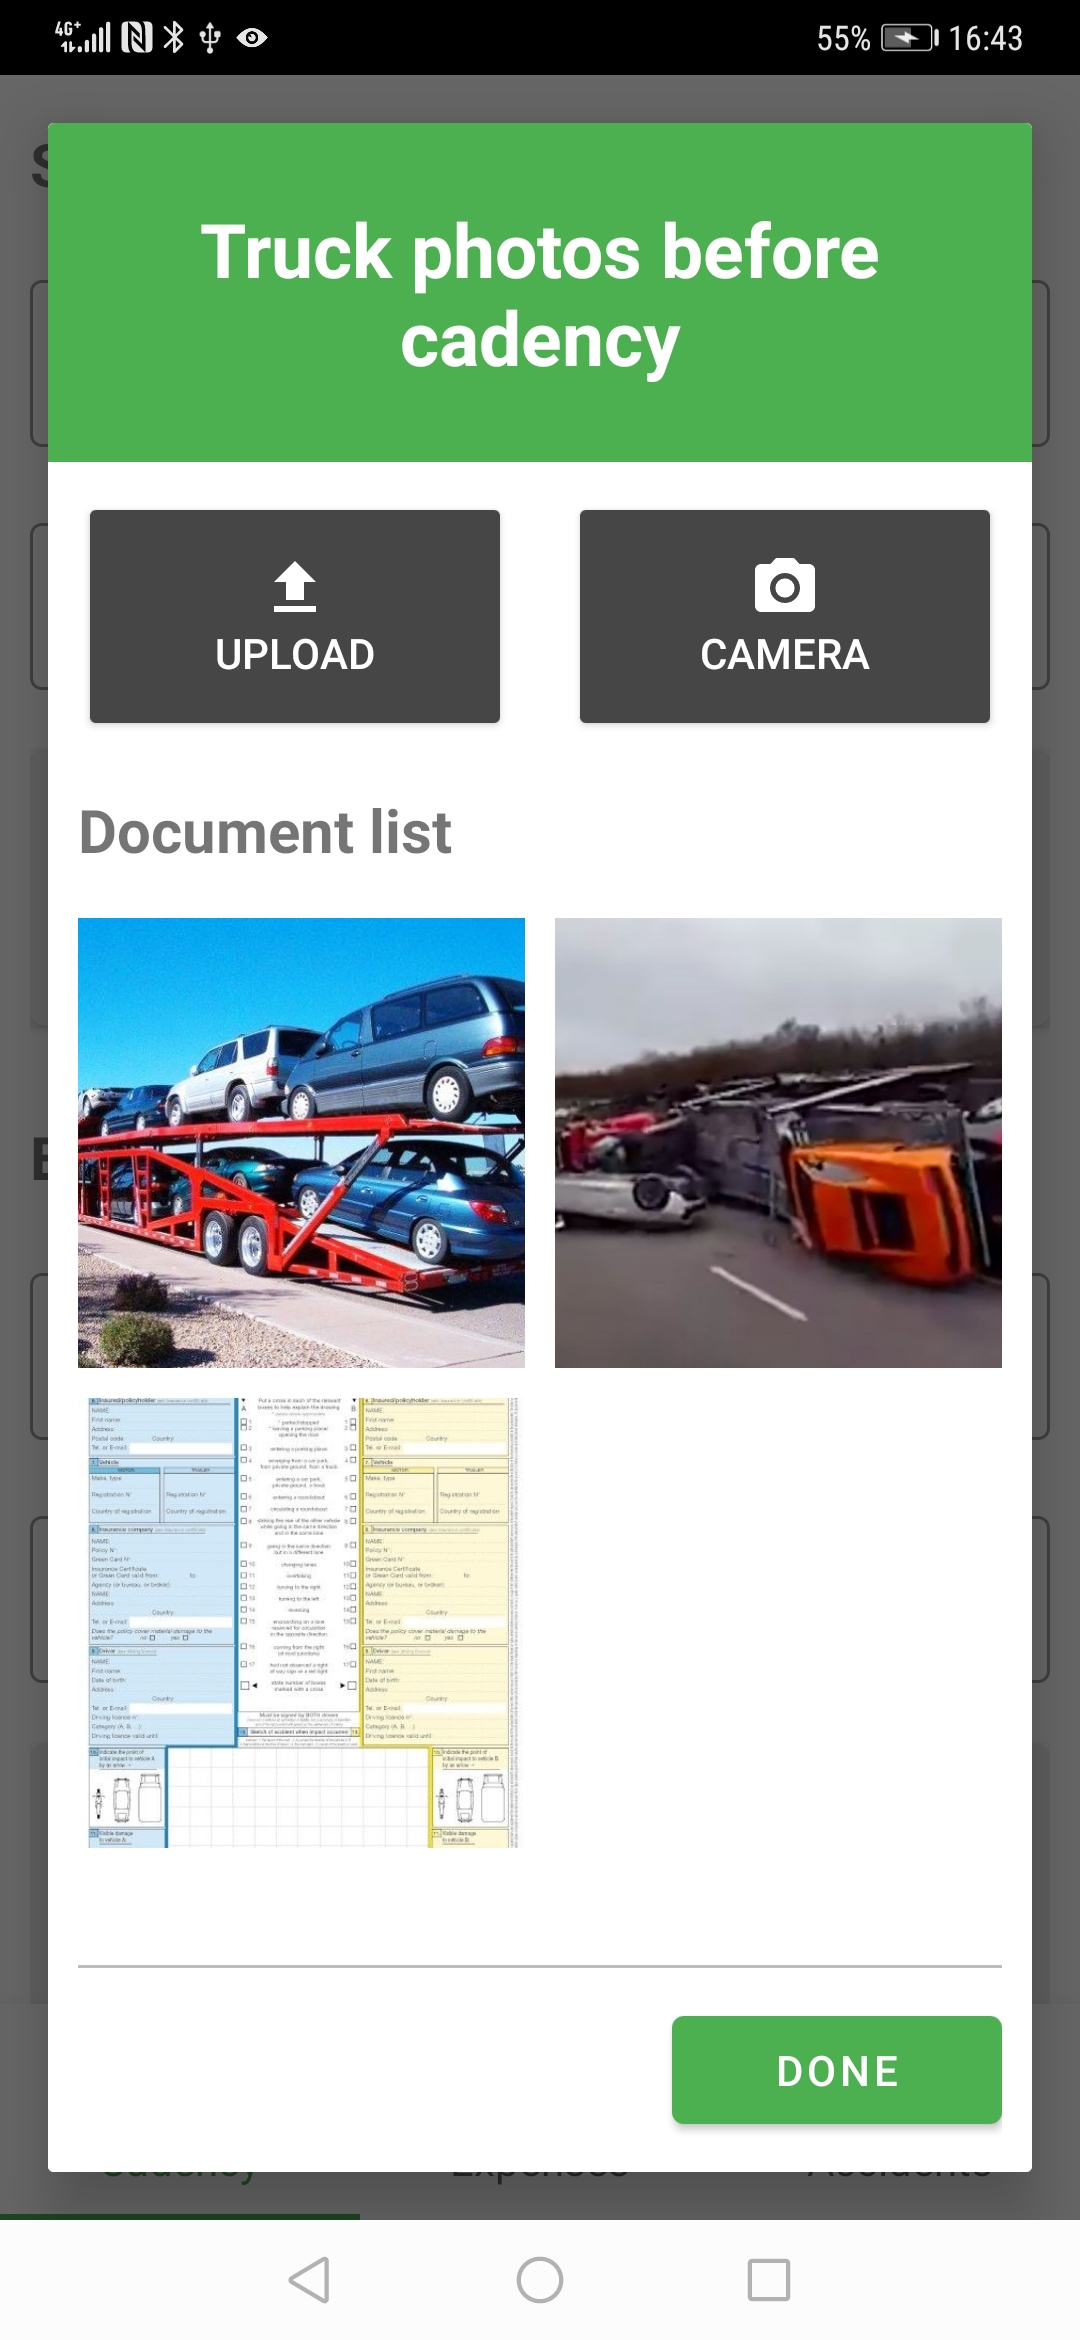 Driver app - driver can assign photos of a damaged cargo